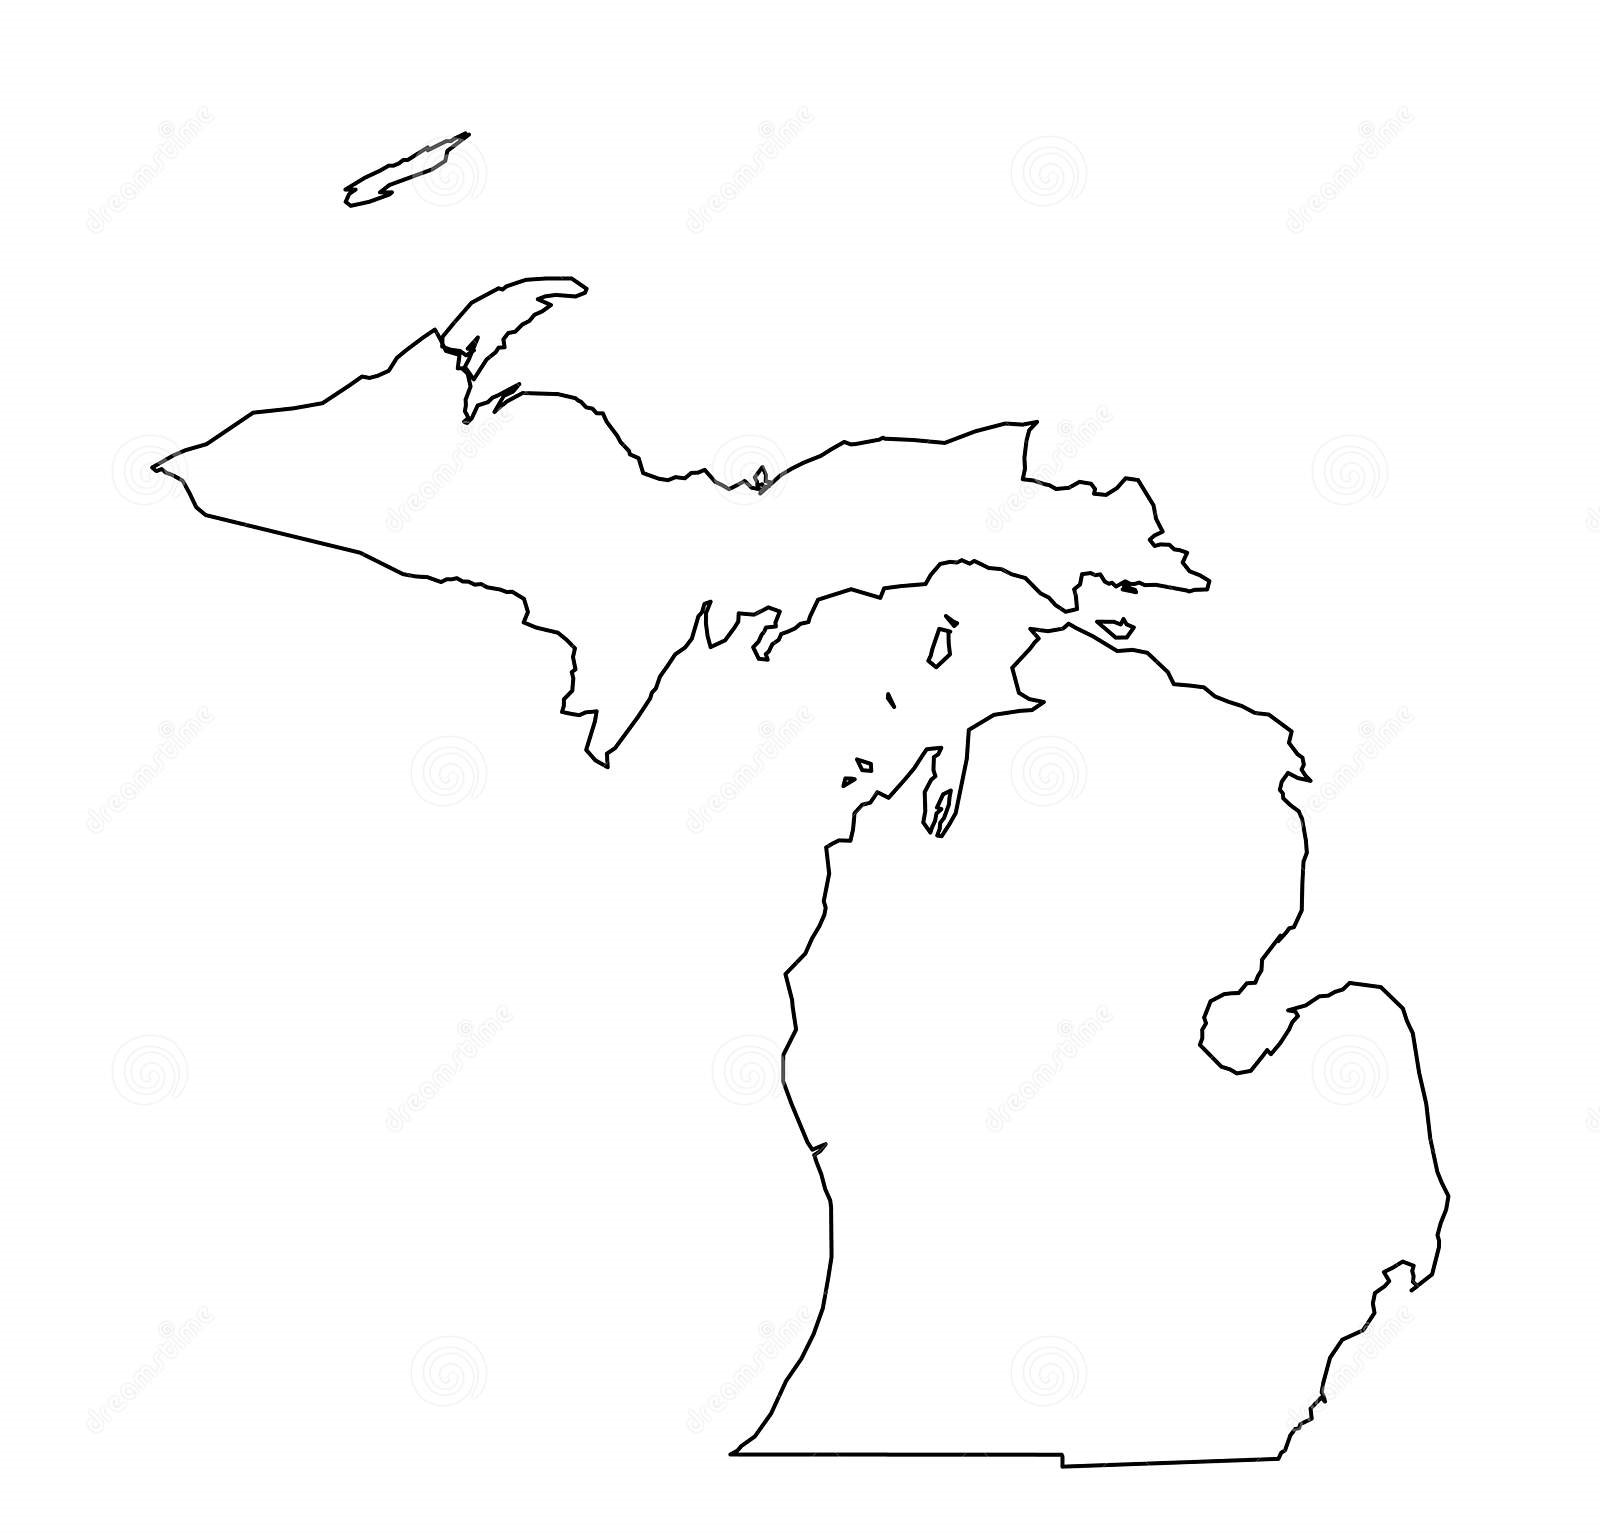 Michigan-Outline-Map
